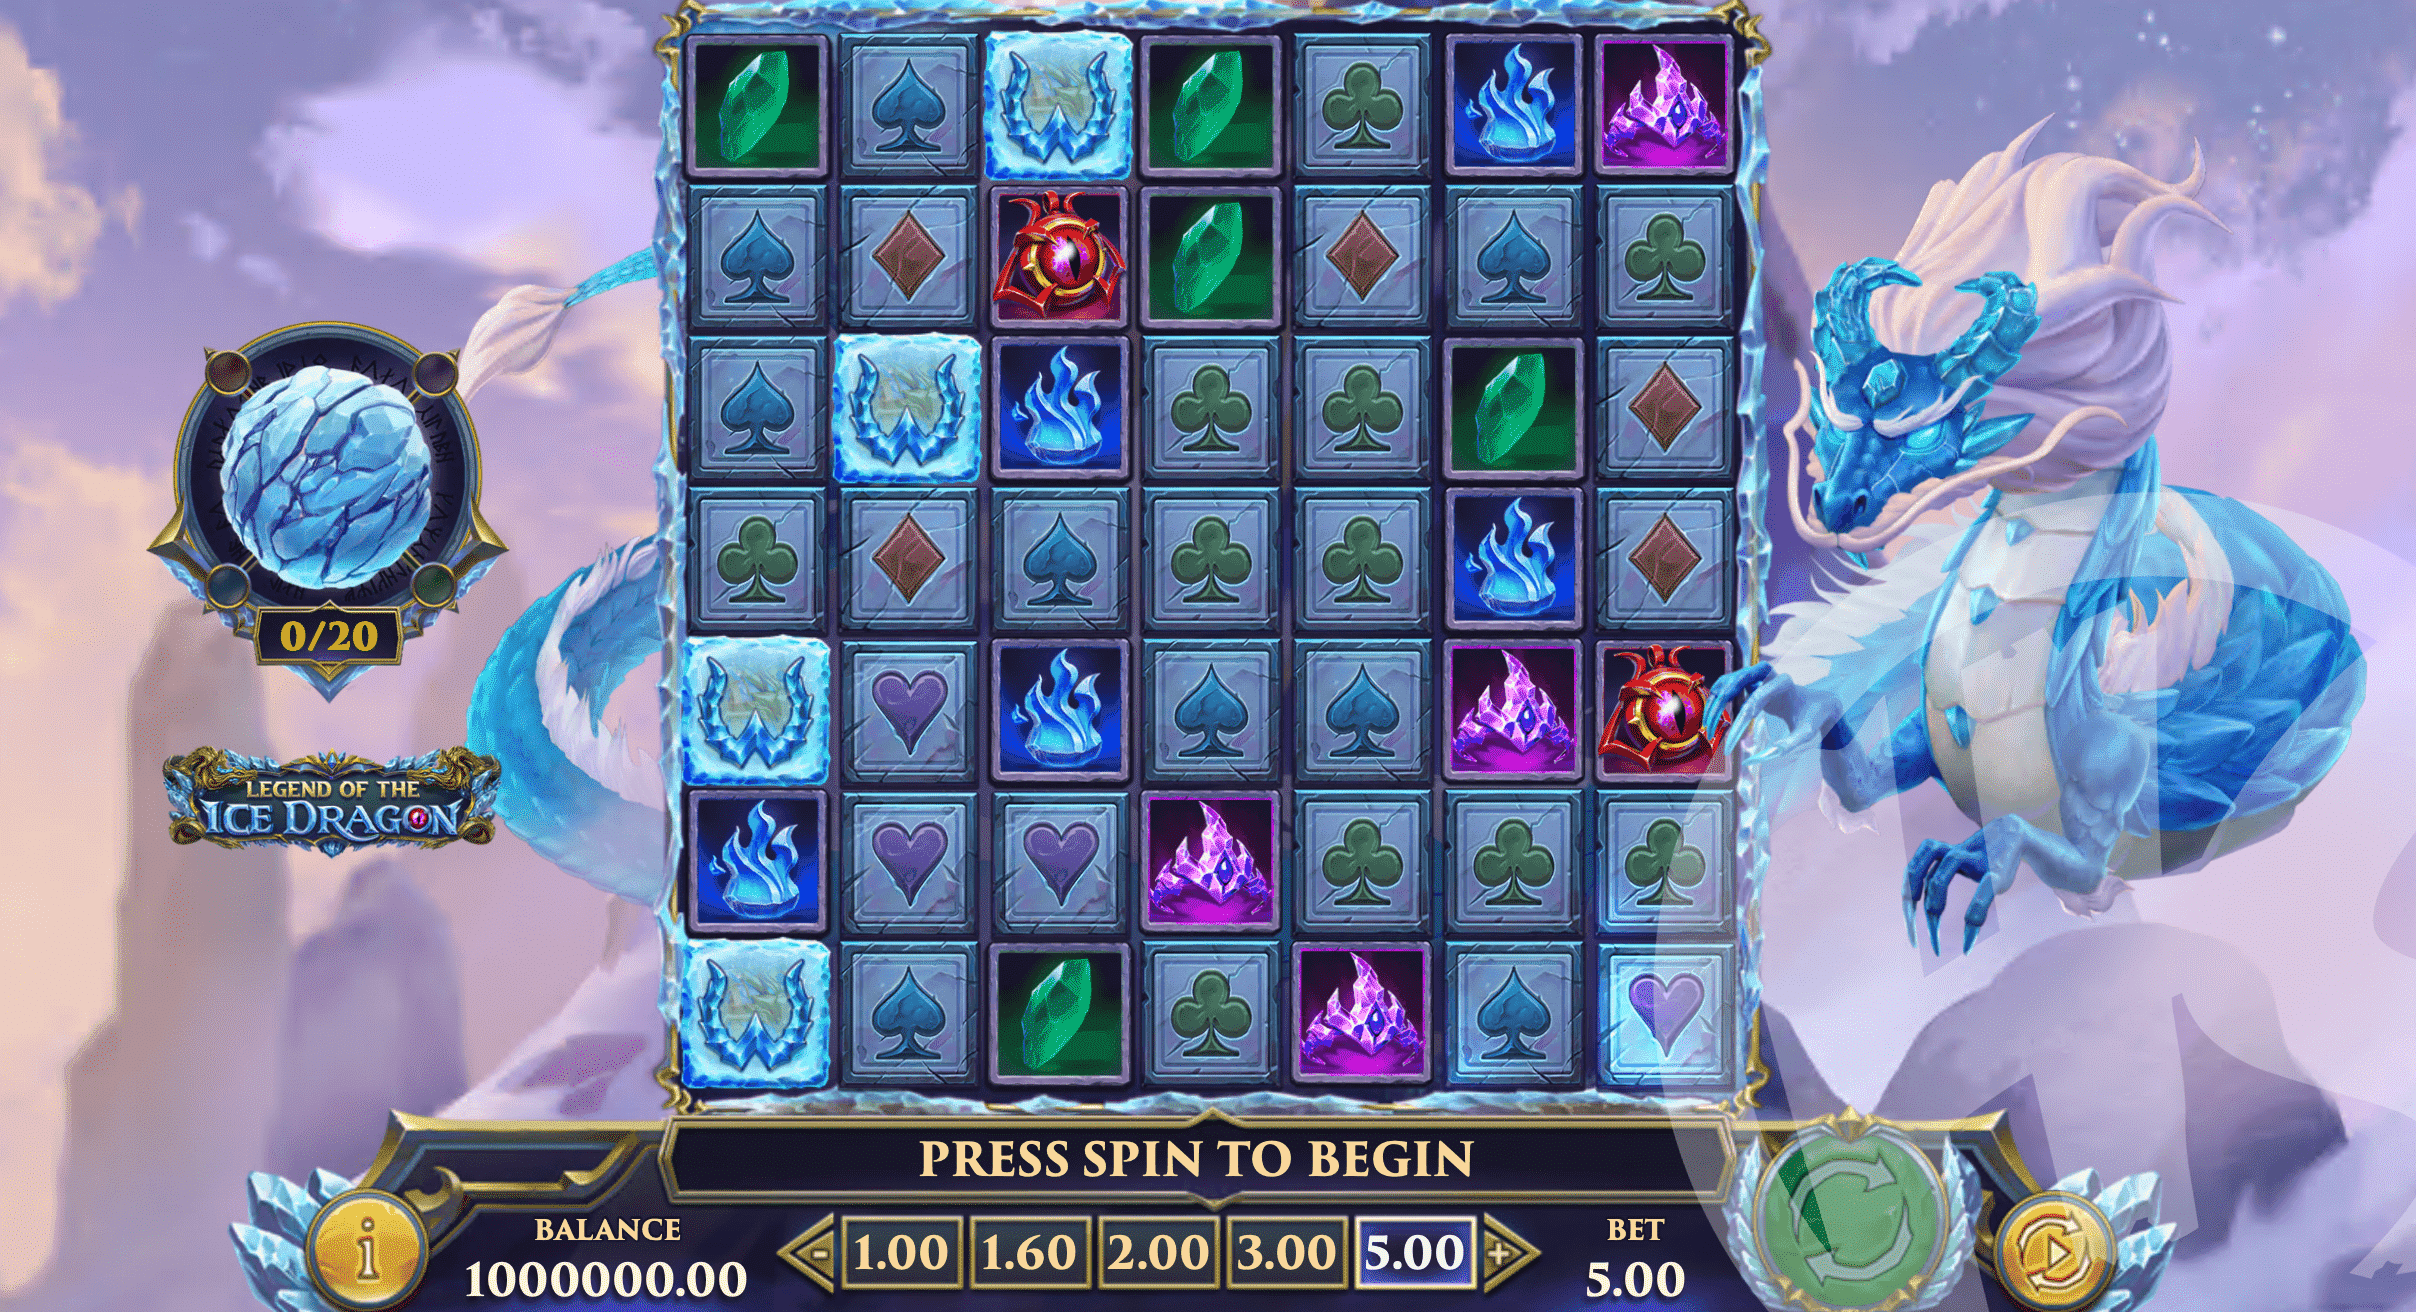 Legend of The Ice Dragon Base Game